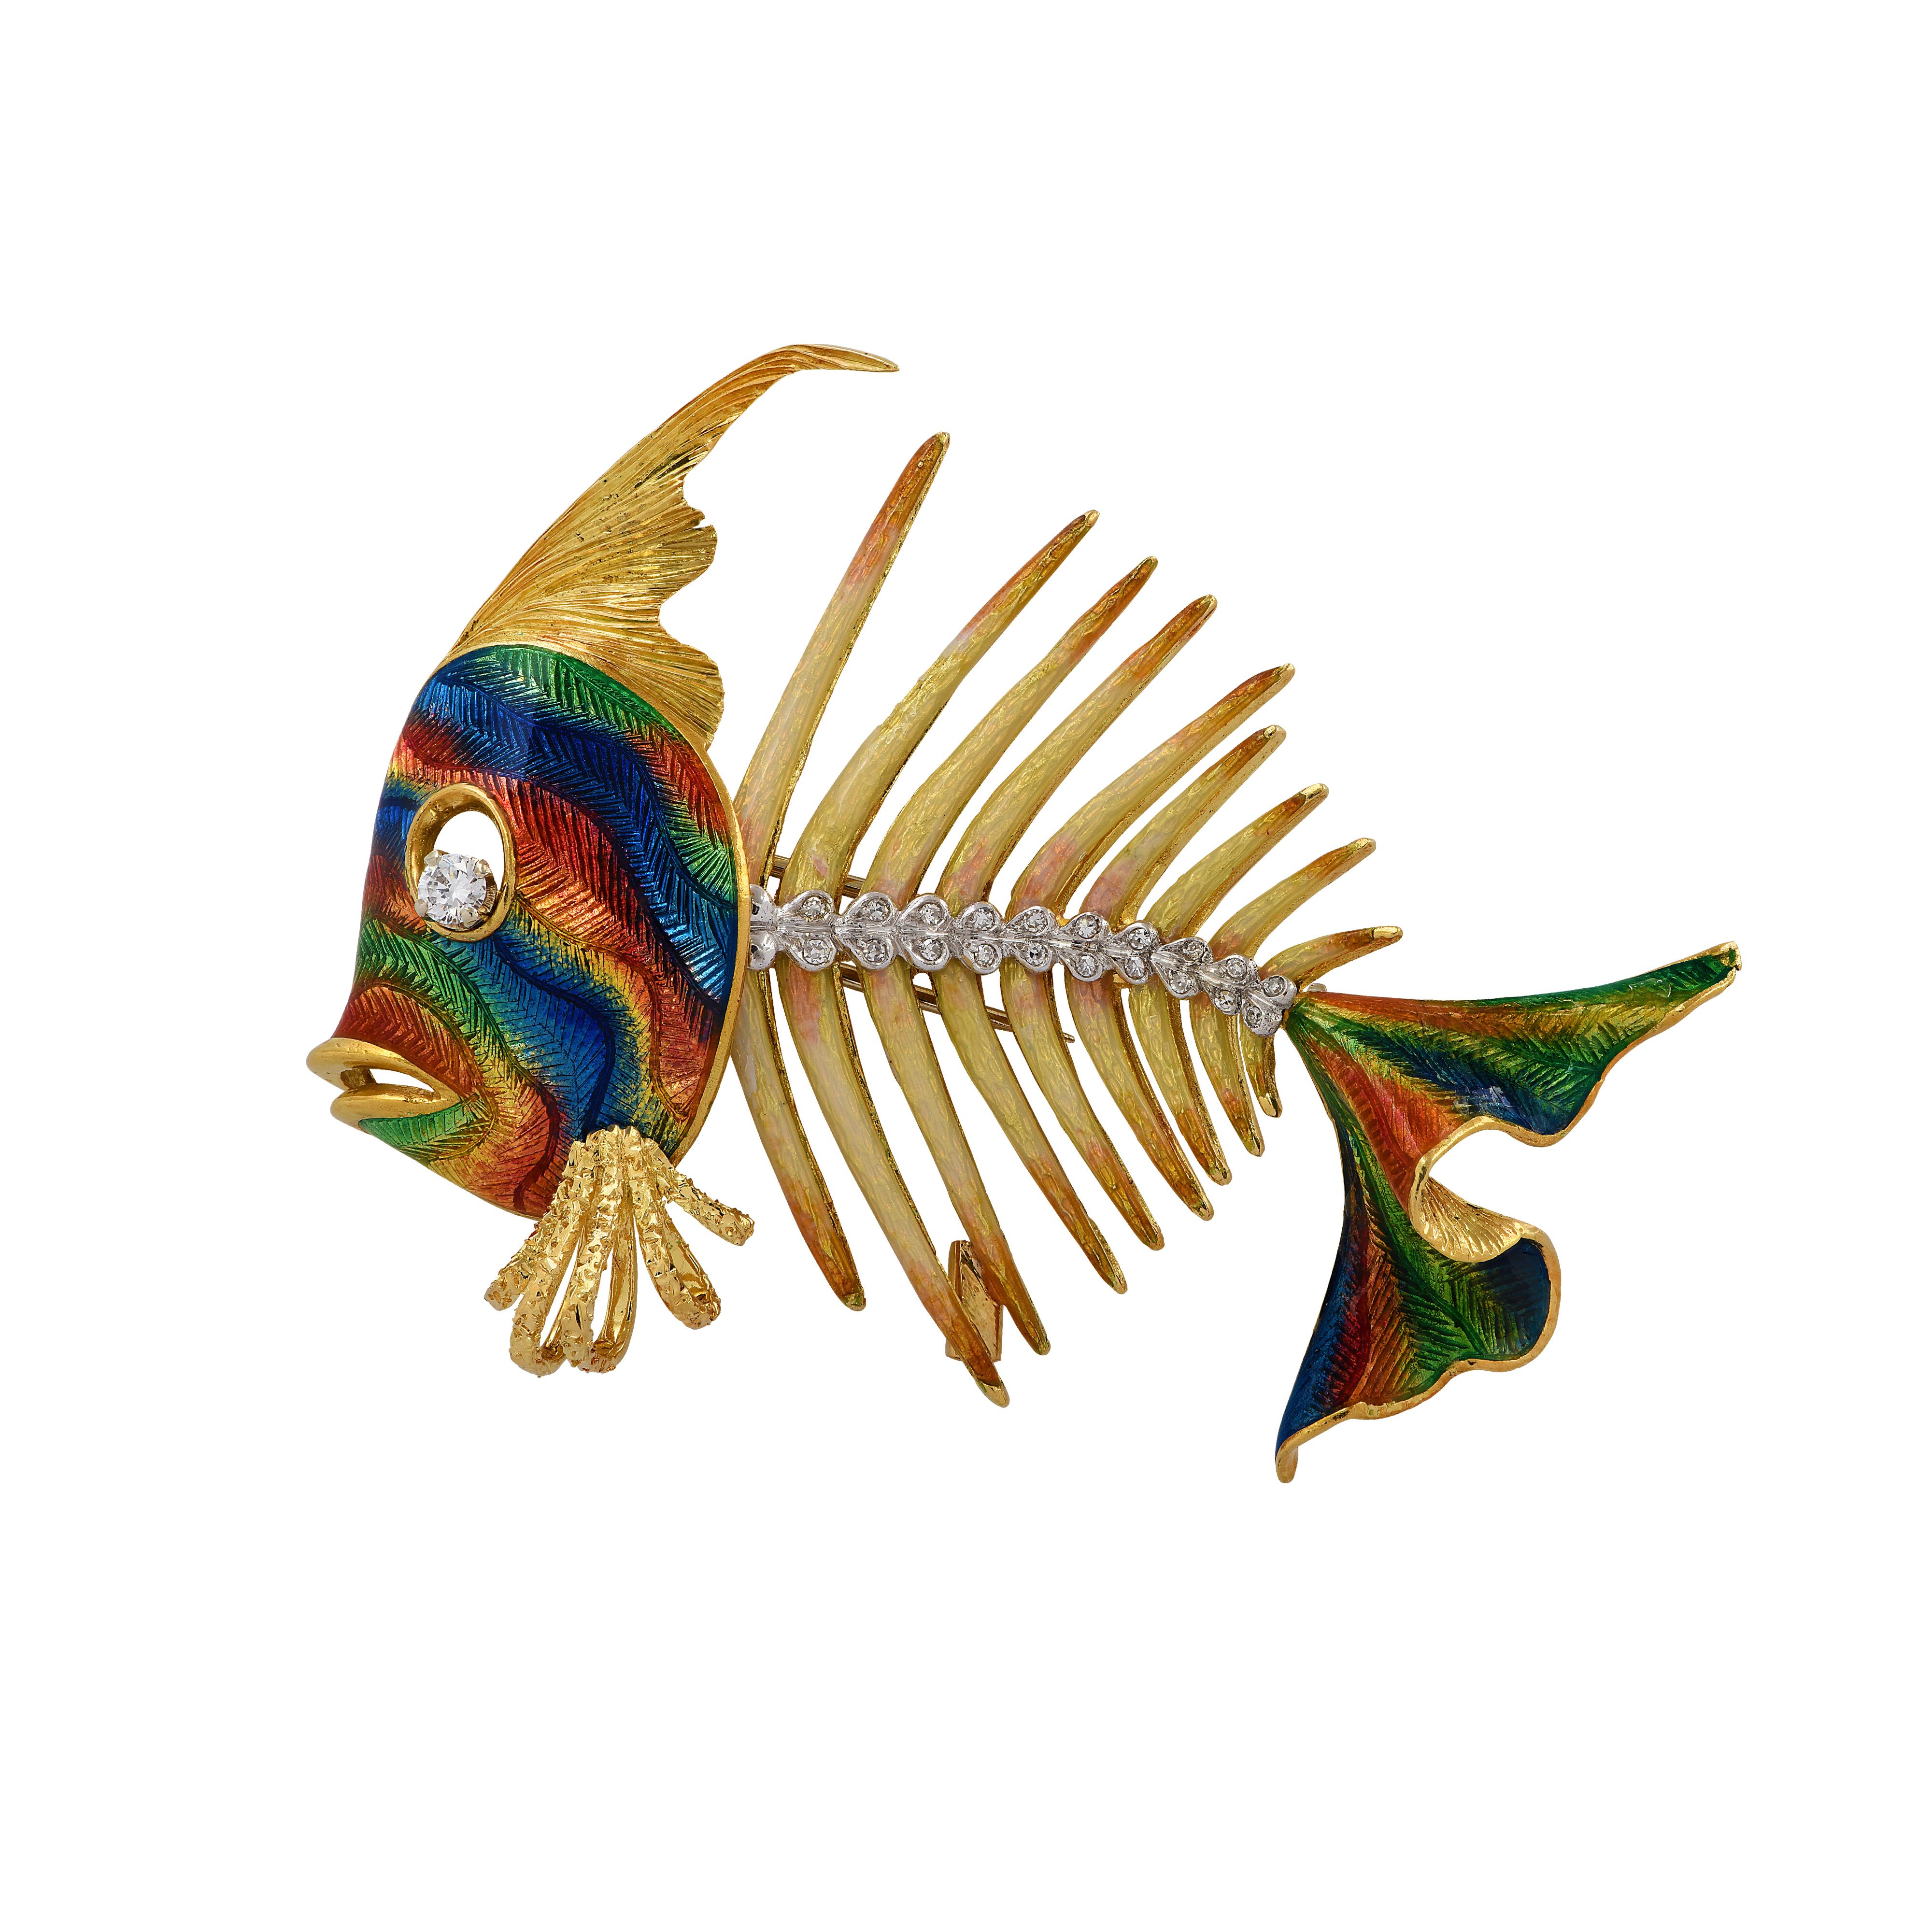 Sensational brooch pin crafted in Italy in 18 karat yellow and white gold and enamel featuring 21 round brilliant and single cut diamonds weighing .25 carats total, G color, VS clarity. This vibrant brooch pin depicts a fish adorned with bright